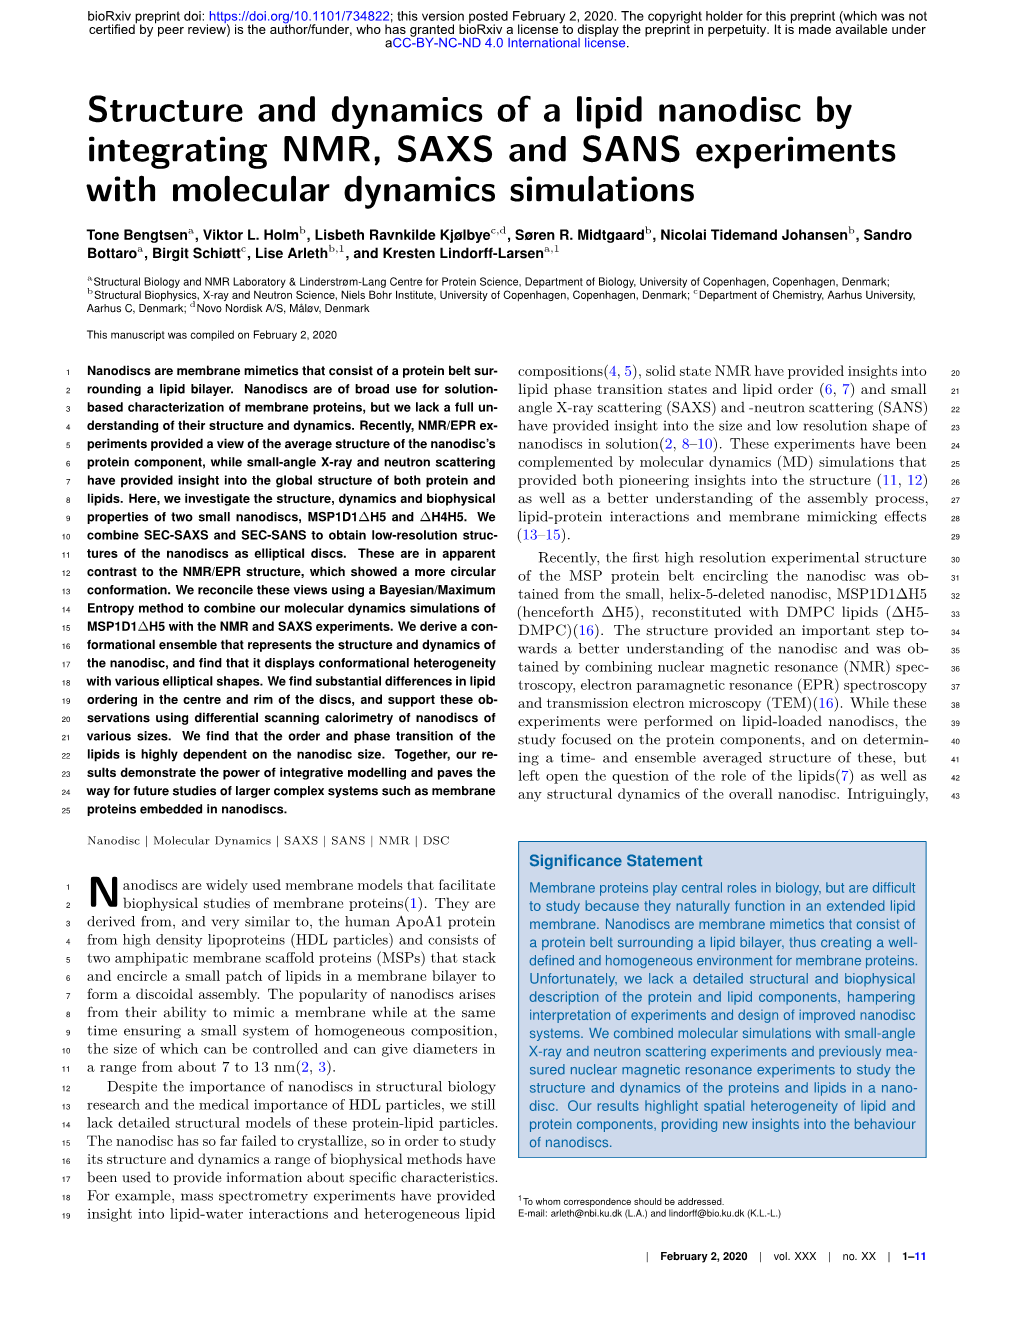 Structure and Dynamics of a Lipid Nanodisc by Integrating NMR, SAXS and SANS Experiments with Molecular Dynamics Simulations